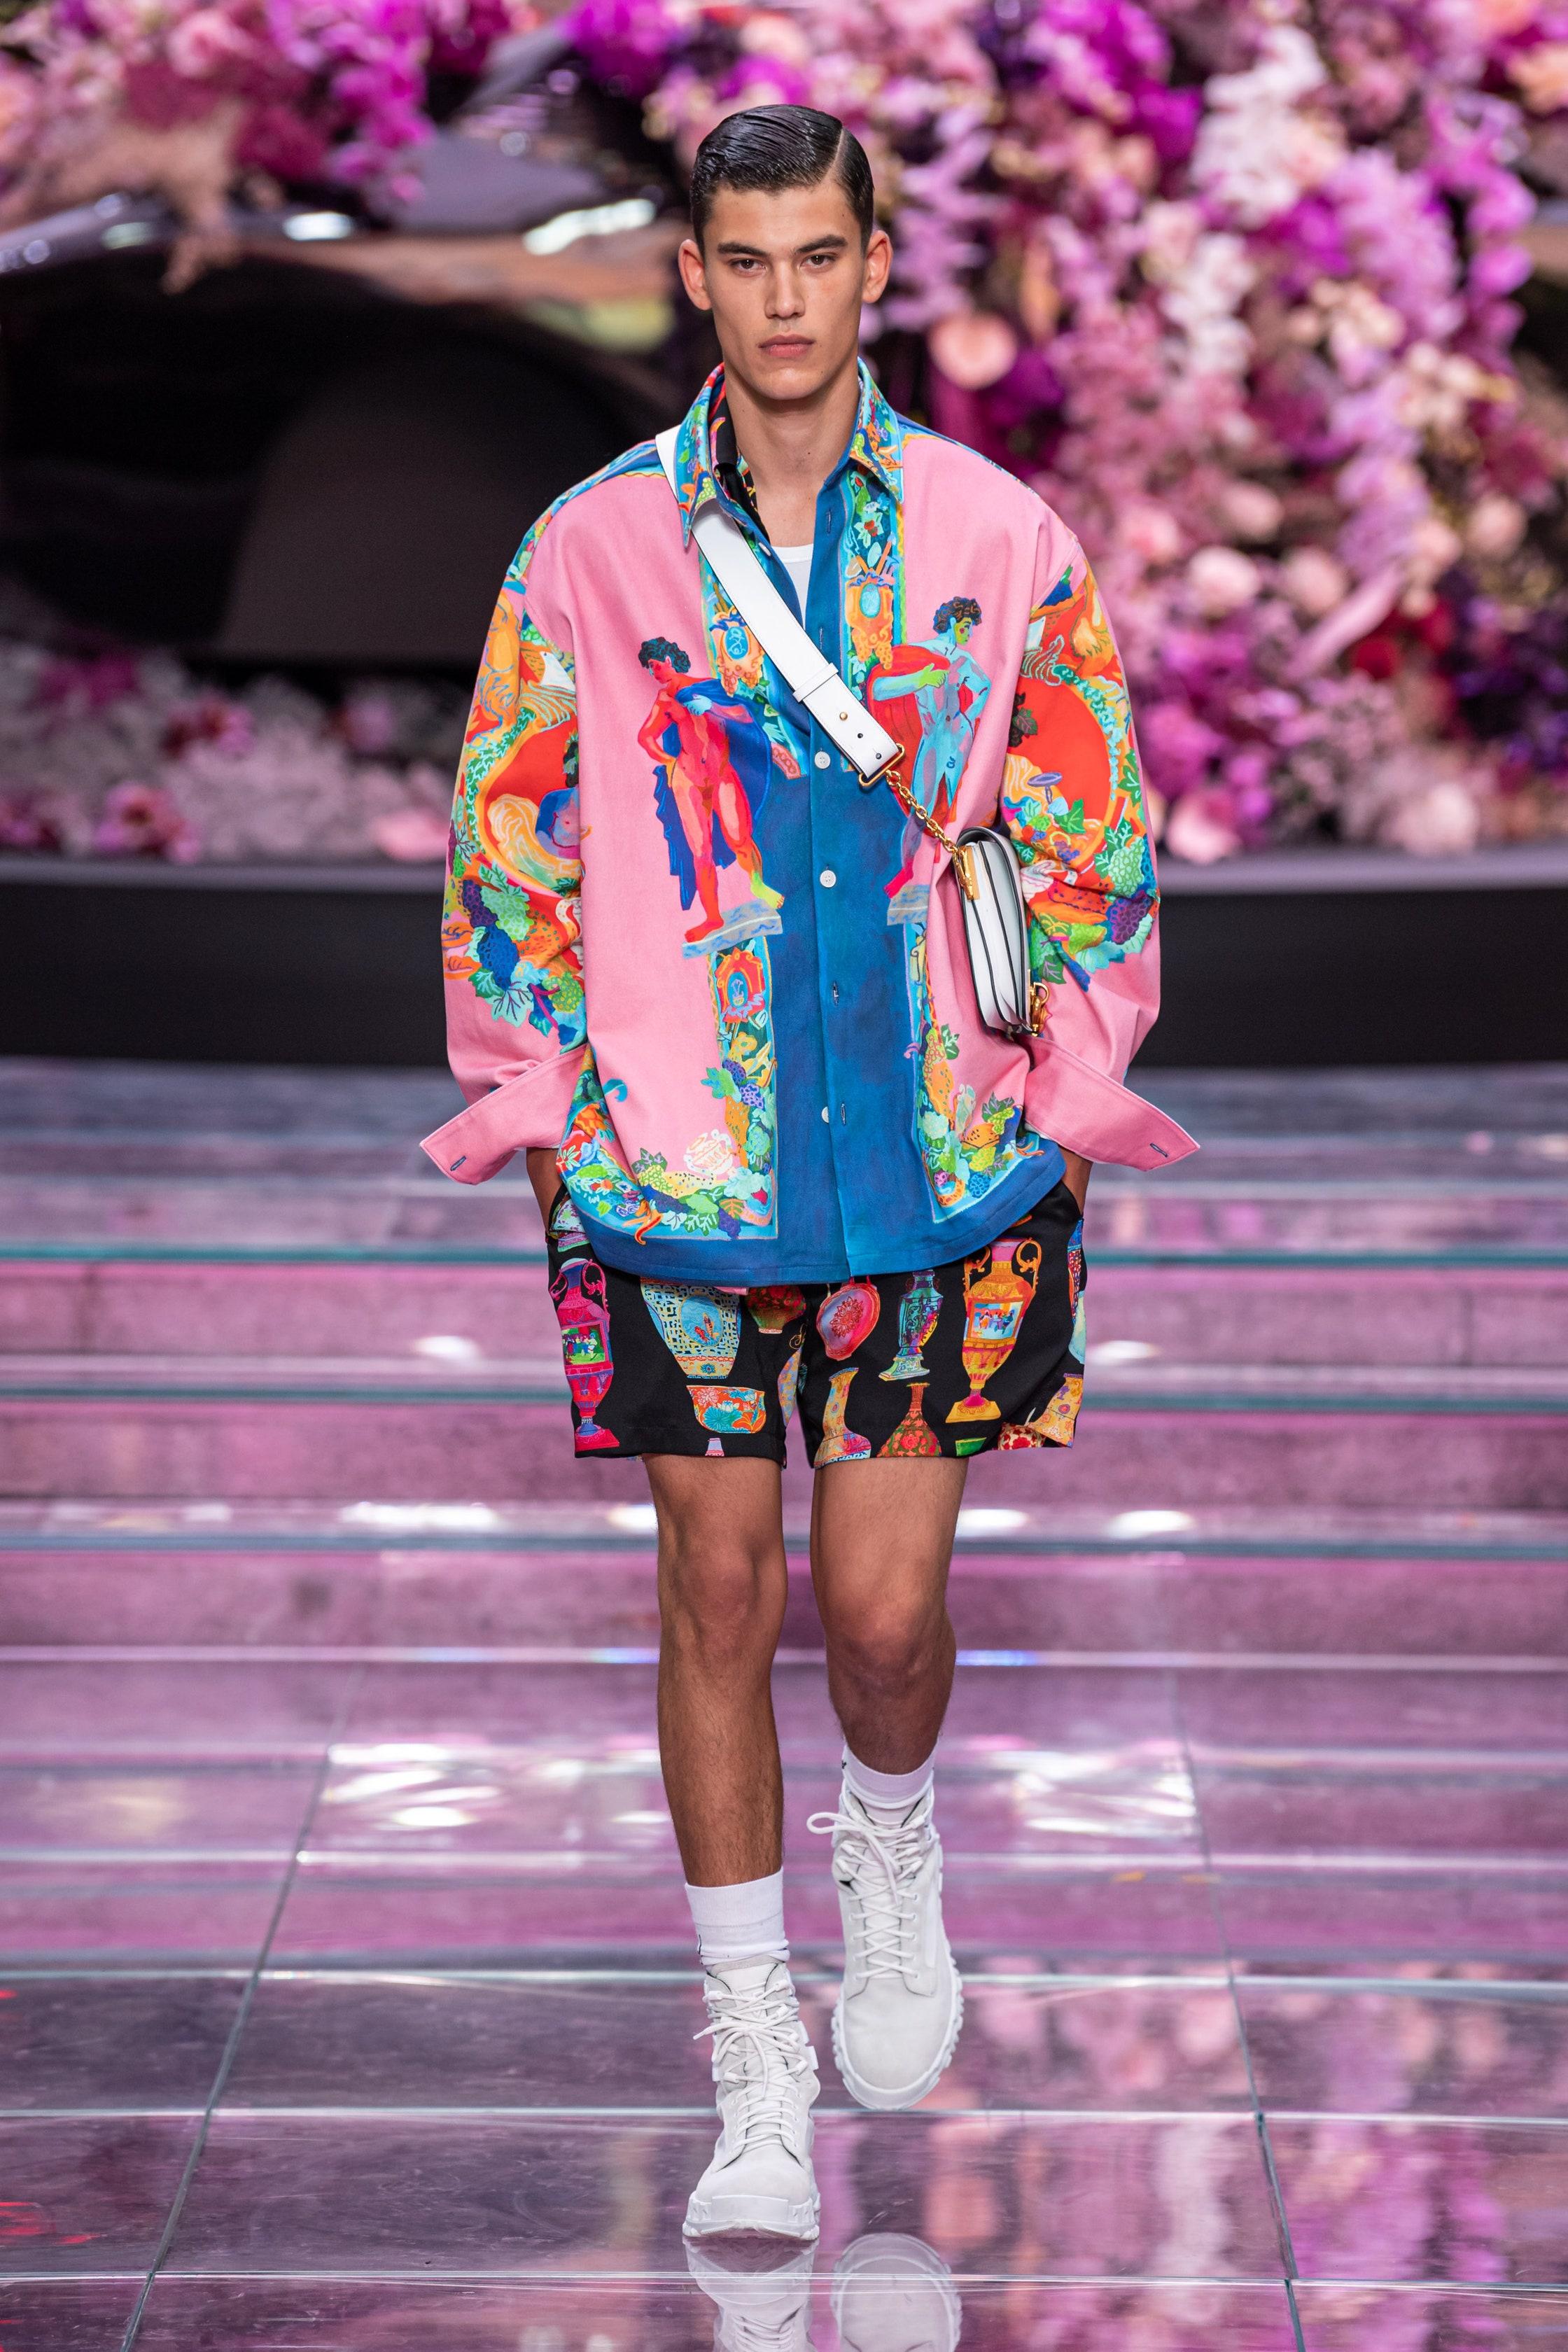 new VERSACE 2020 Runway Andy Dixon Caravaggio Archive pink silk shirt EU39 M
Reference: TGAS/C00006
Brand: Versace
Designer: Donatella Versace
Collection: Spring Summer 2020 Runway
Material: Silk
Color: Pink
Pattern: Caraggio
Closure: Button
Extra